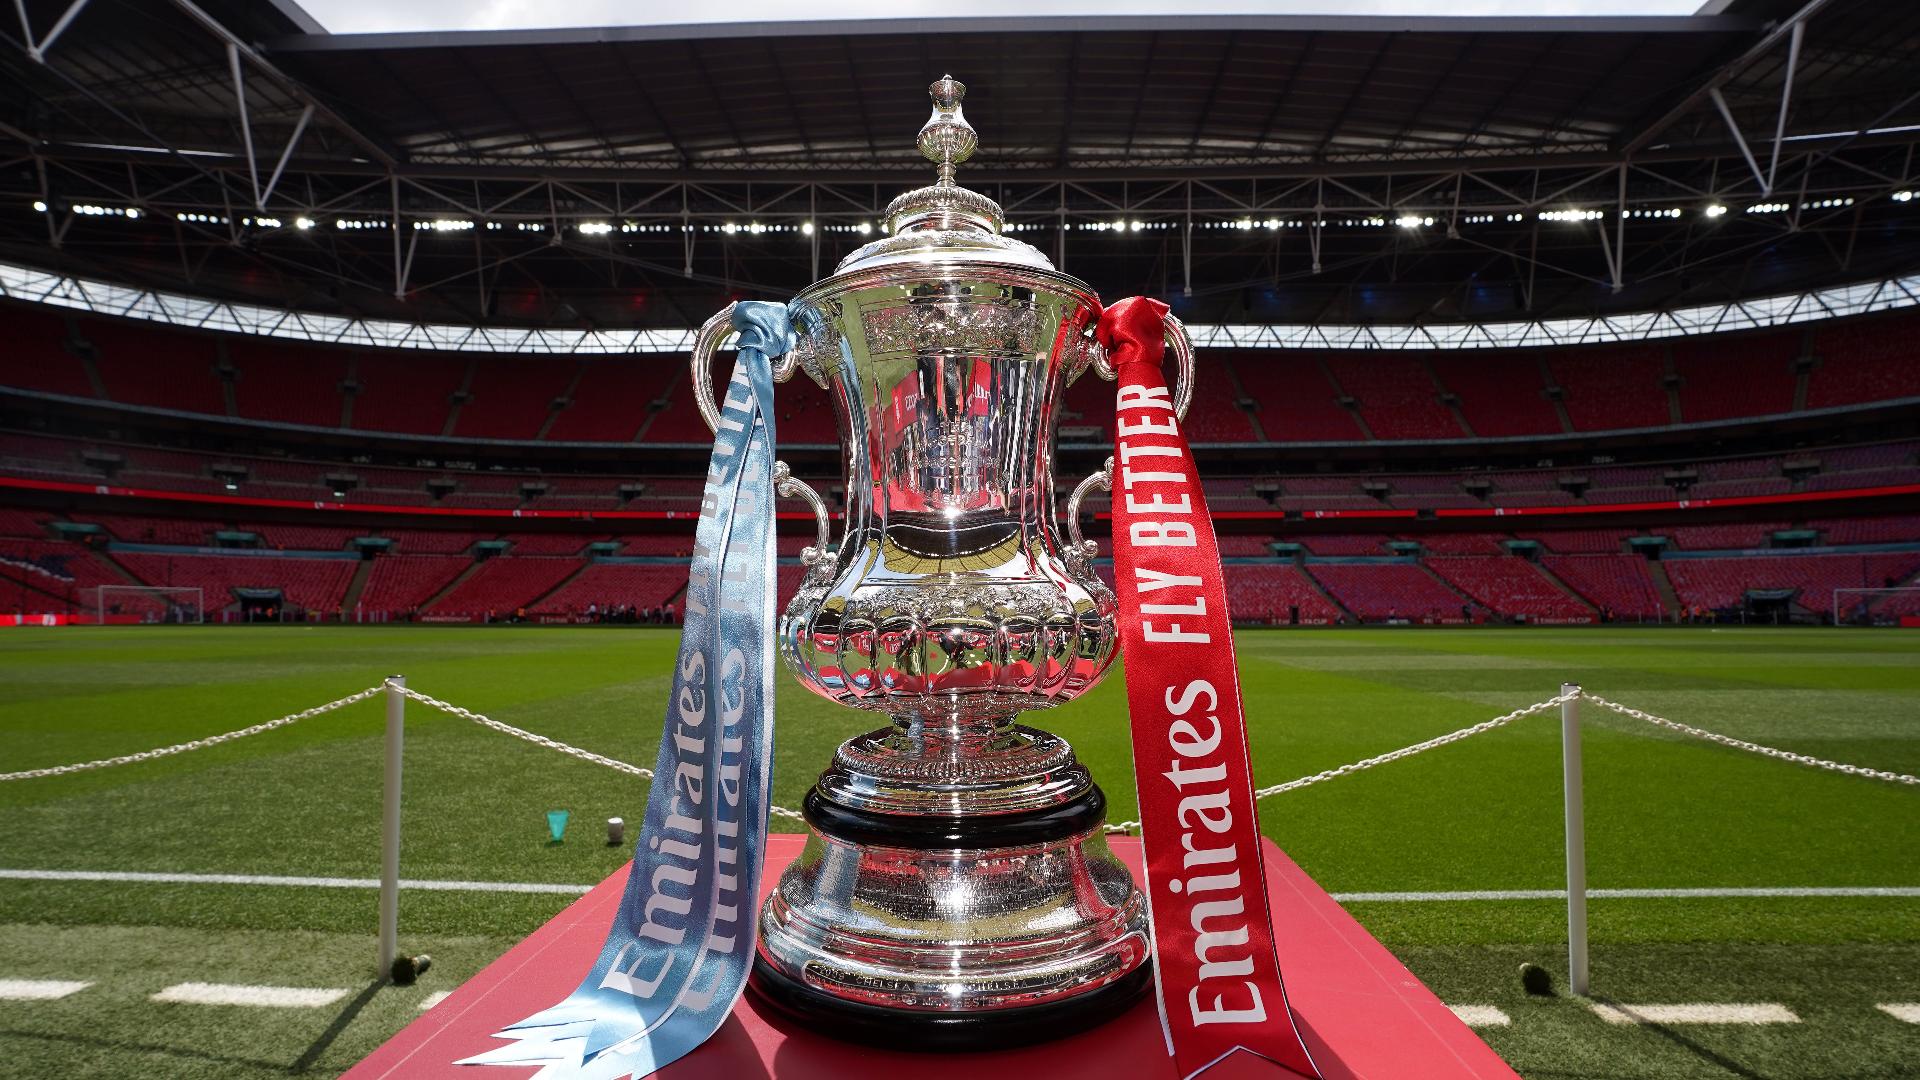 FA pledges to discuss proposed FA Cup changes with fans groups